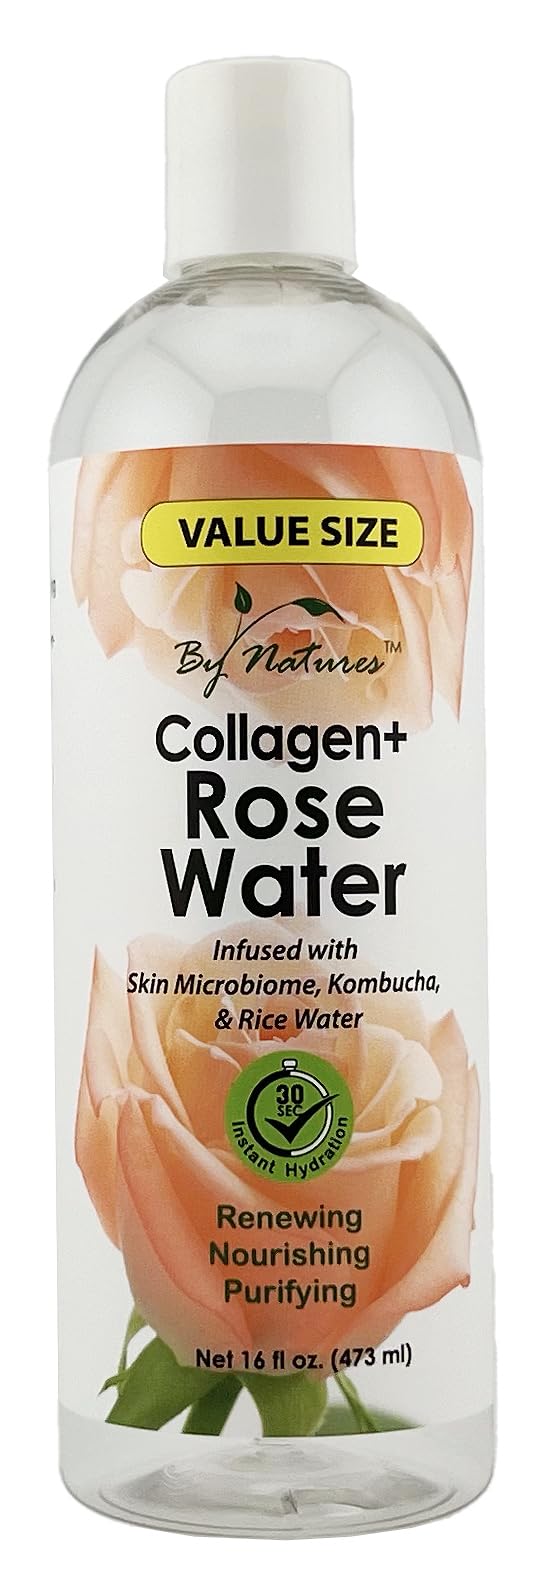 By Natures Collagen + Rose Water 16.0 Fl Oz (Pack of 1)